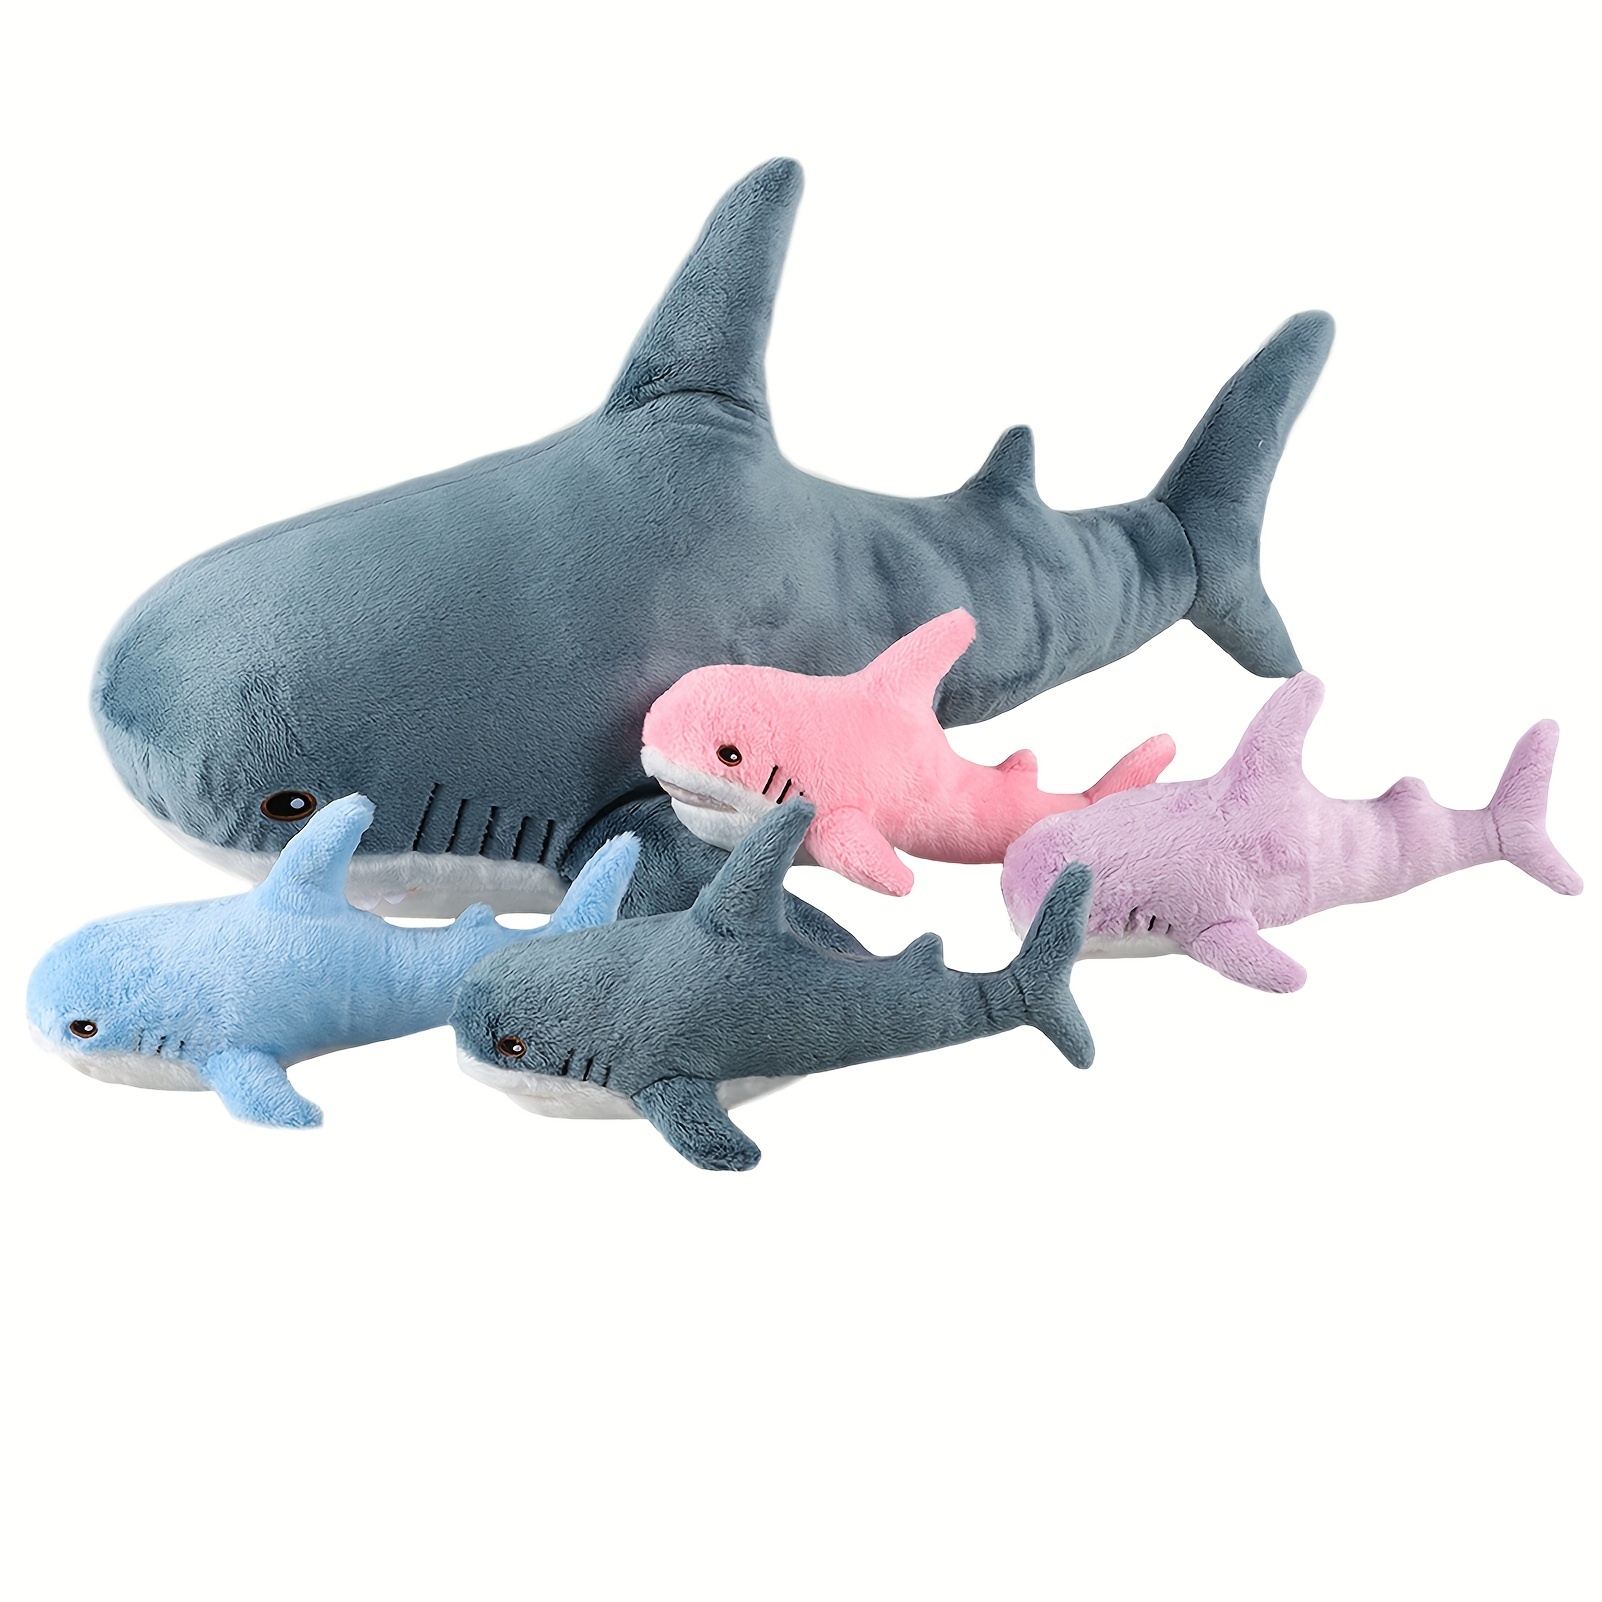 

21.65 Inch Giant Shark Animal Plush With 4 Baby Plush In Her Tummy Soft Squishy Shark Toys Giant Shark Plush Pillows Chubby Shark For Children Gift Present Animal Pillows For Girls And Boys